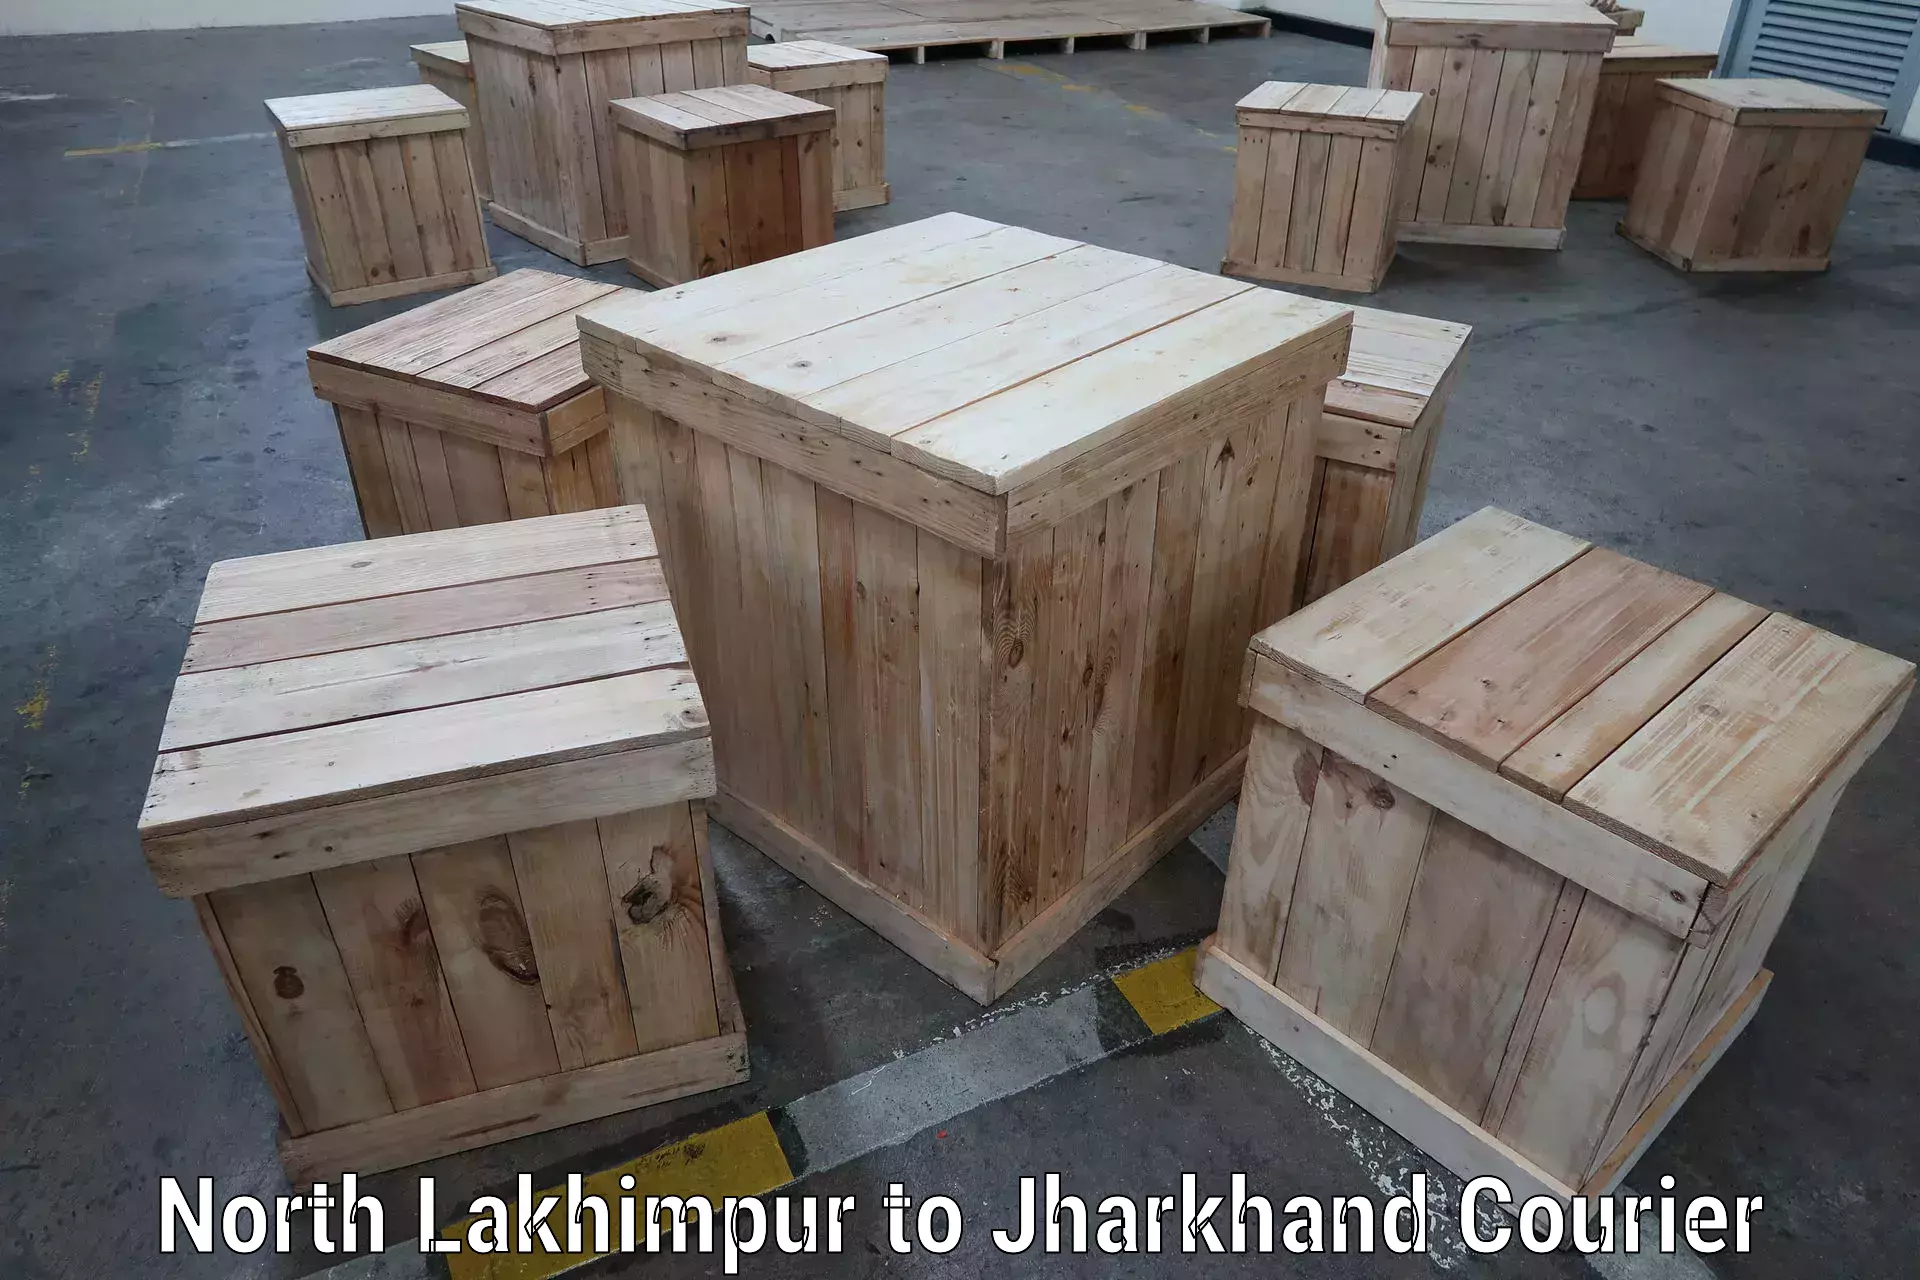 Global shipping solutions North Lakhimpur to Jharkhand